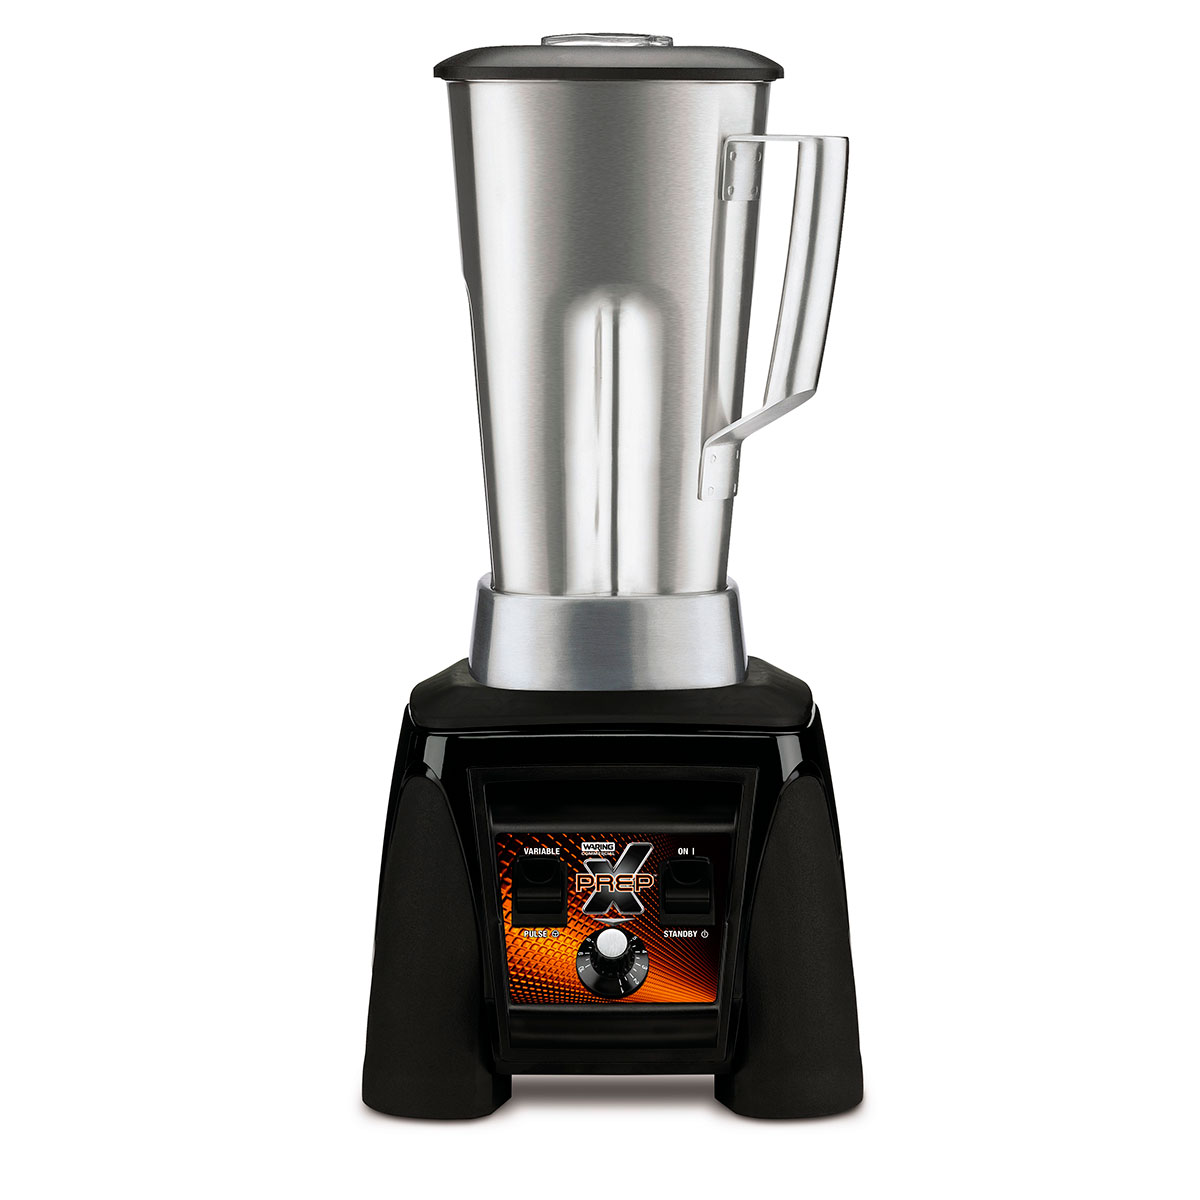 Commercial X-Prep Hi-Power Variable-Speed Food Blender with 64 oz. Stainless Steel